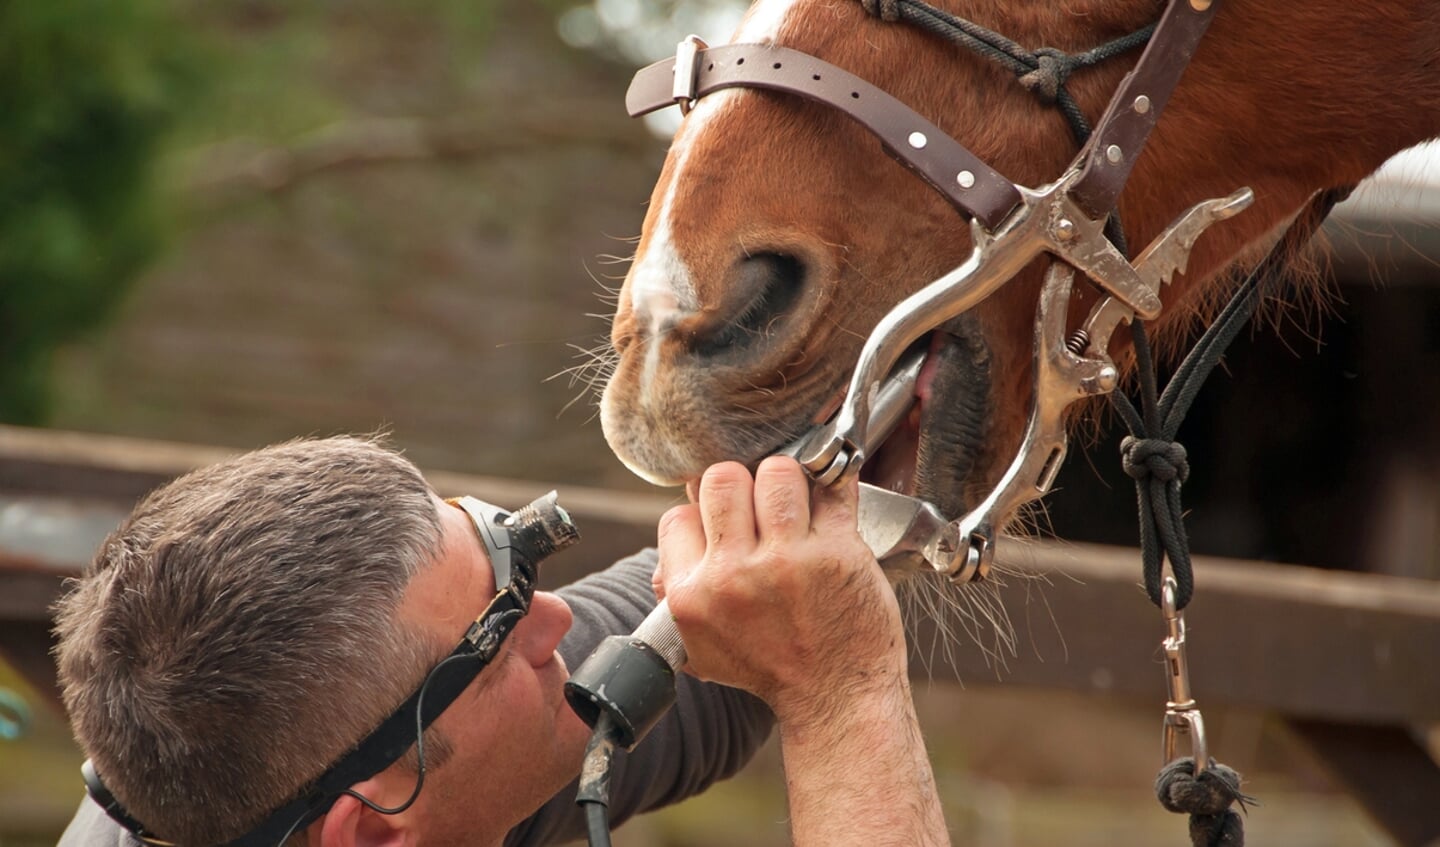 Dental treatment from an equine professional